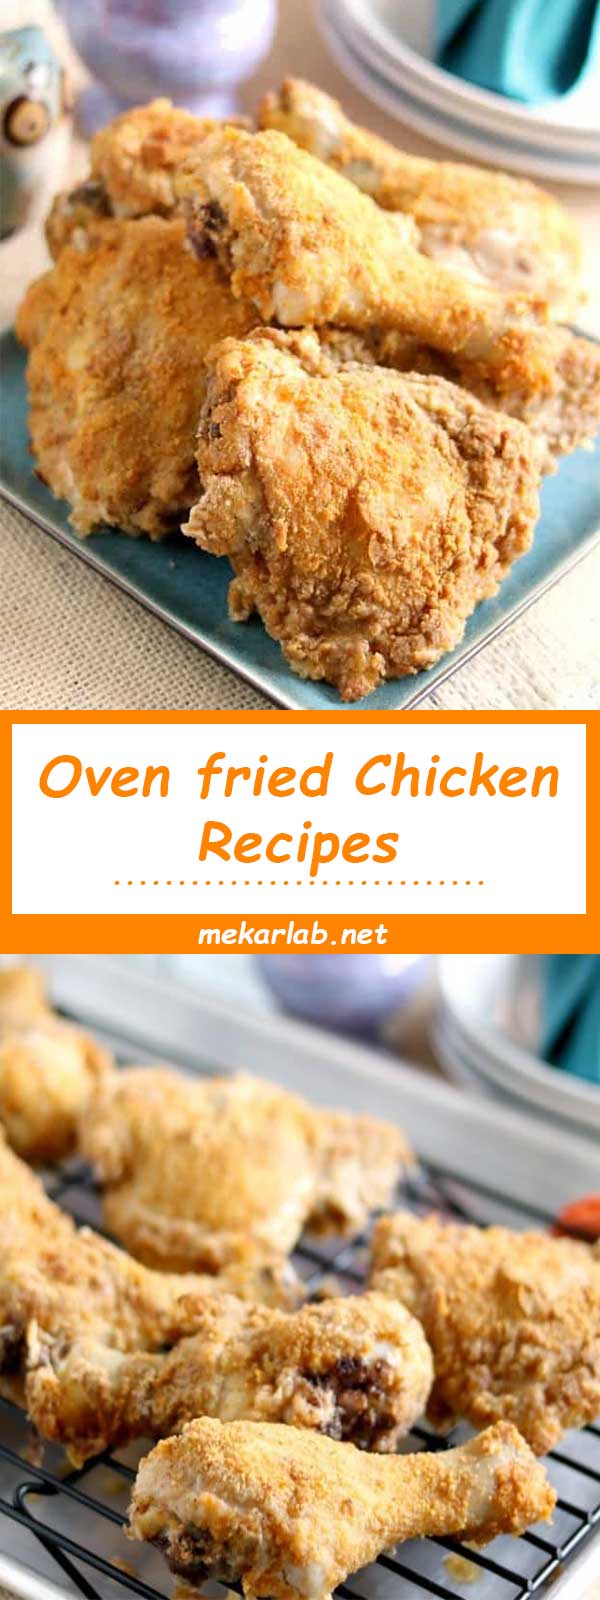 Oven fried Chicken Recipes